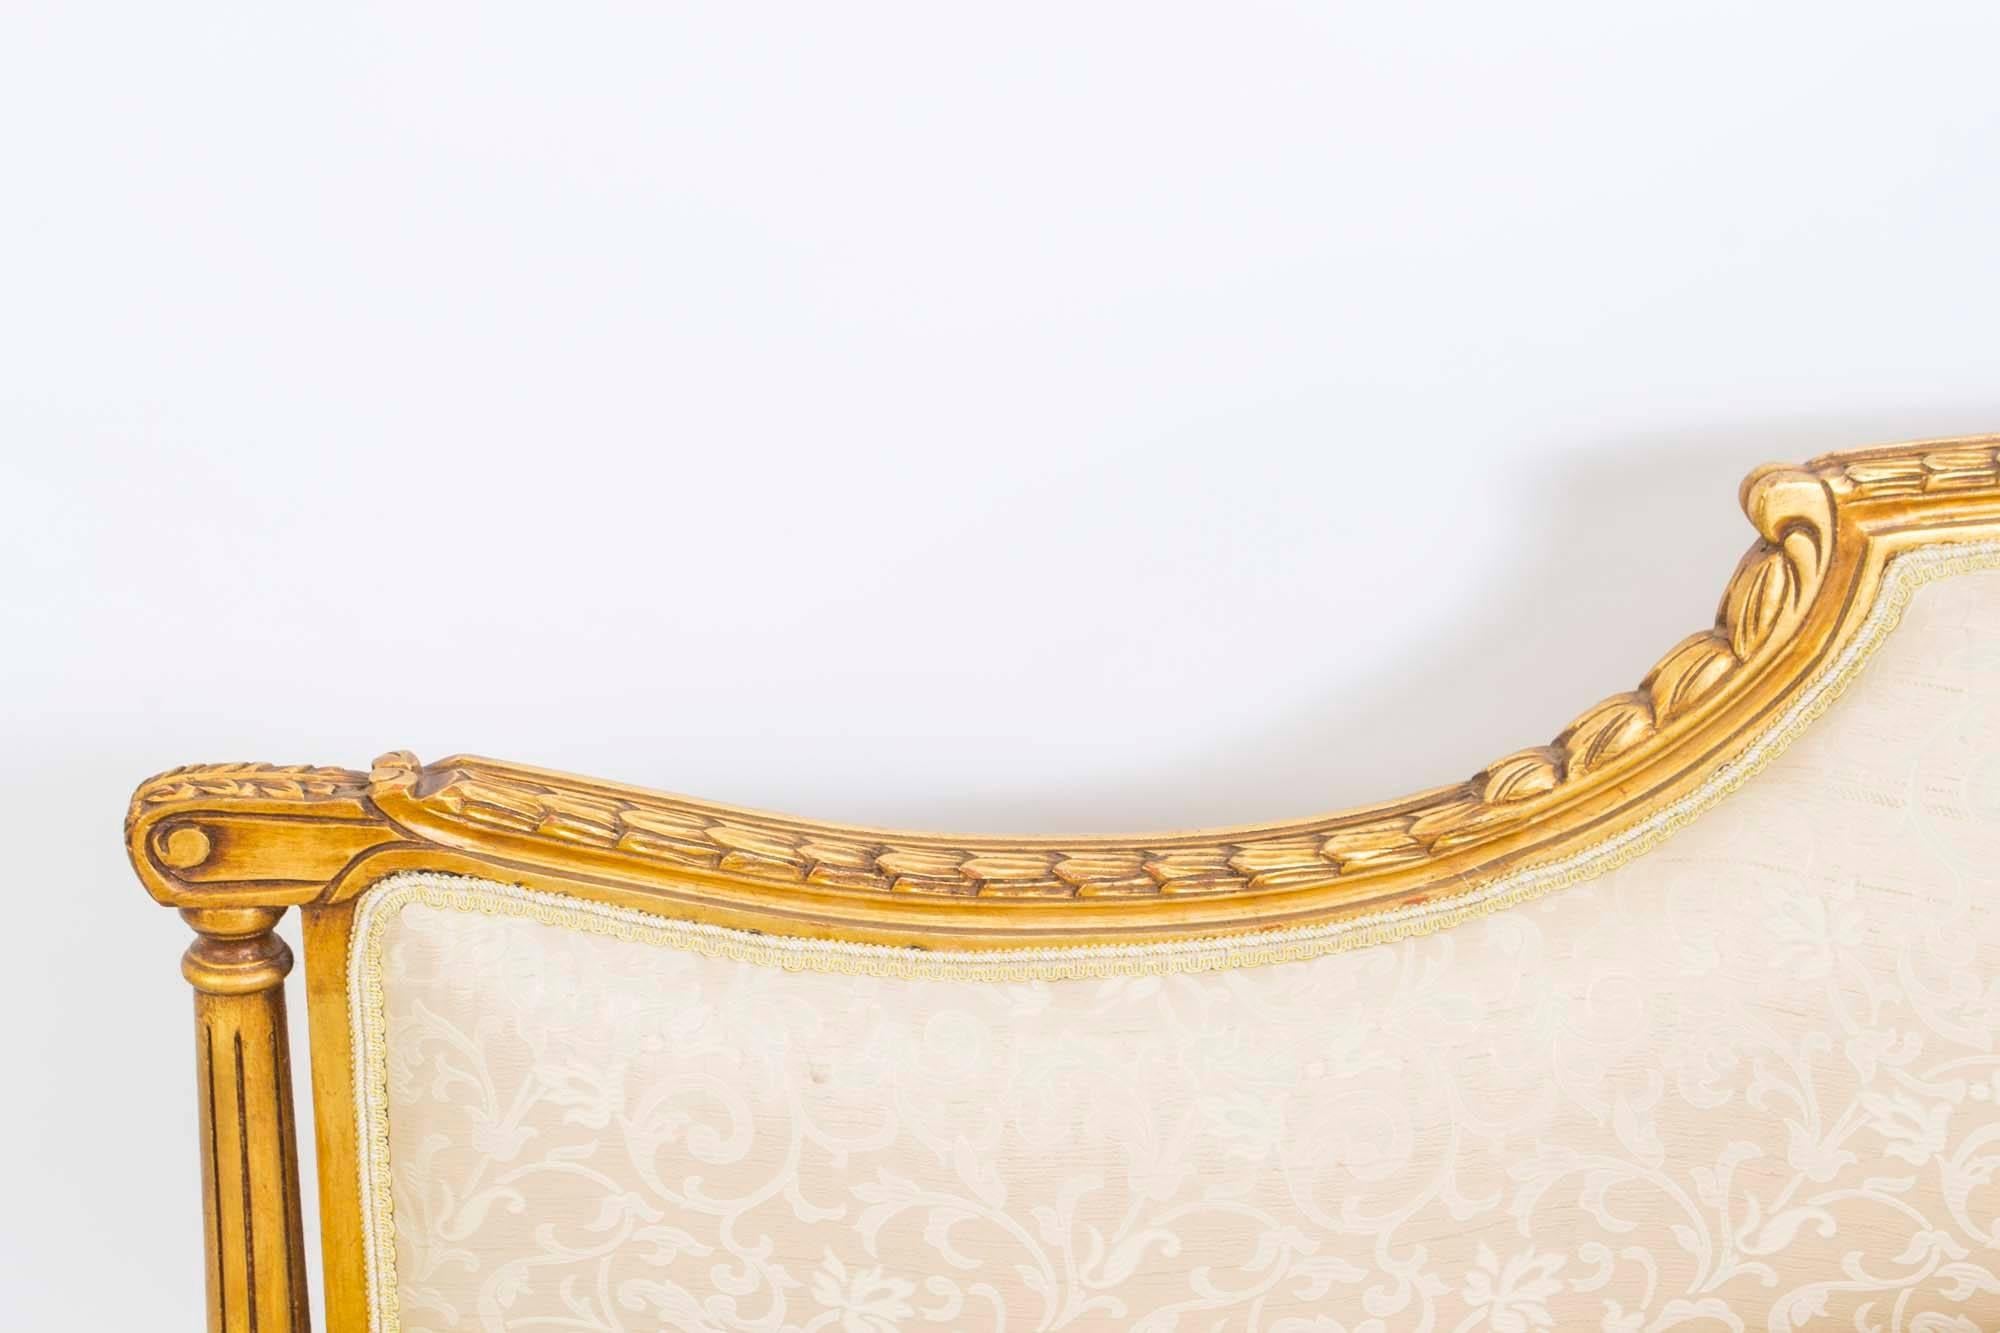 This is a gorgeous French giltwood chaise longue in the Louis XVI style, dating from the last quarter of the 20th century.

This piece is luxuriously upholstered in a fine cream damask with delicate pattern.

Add a touch of sophisticated style